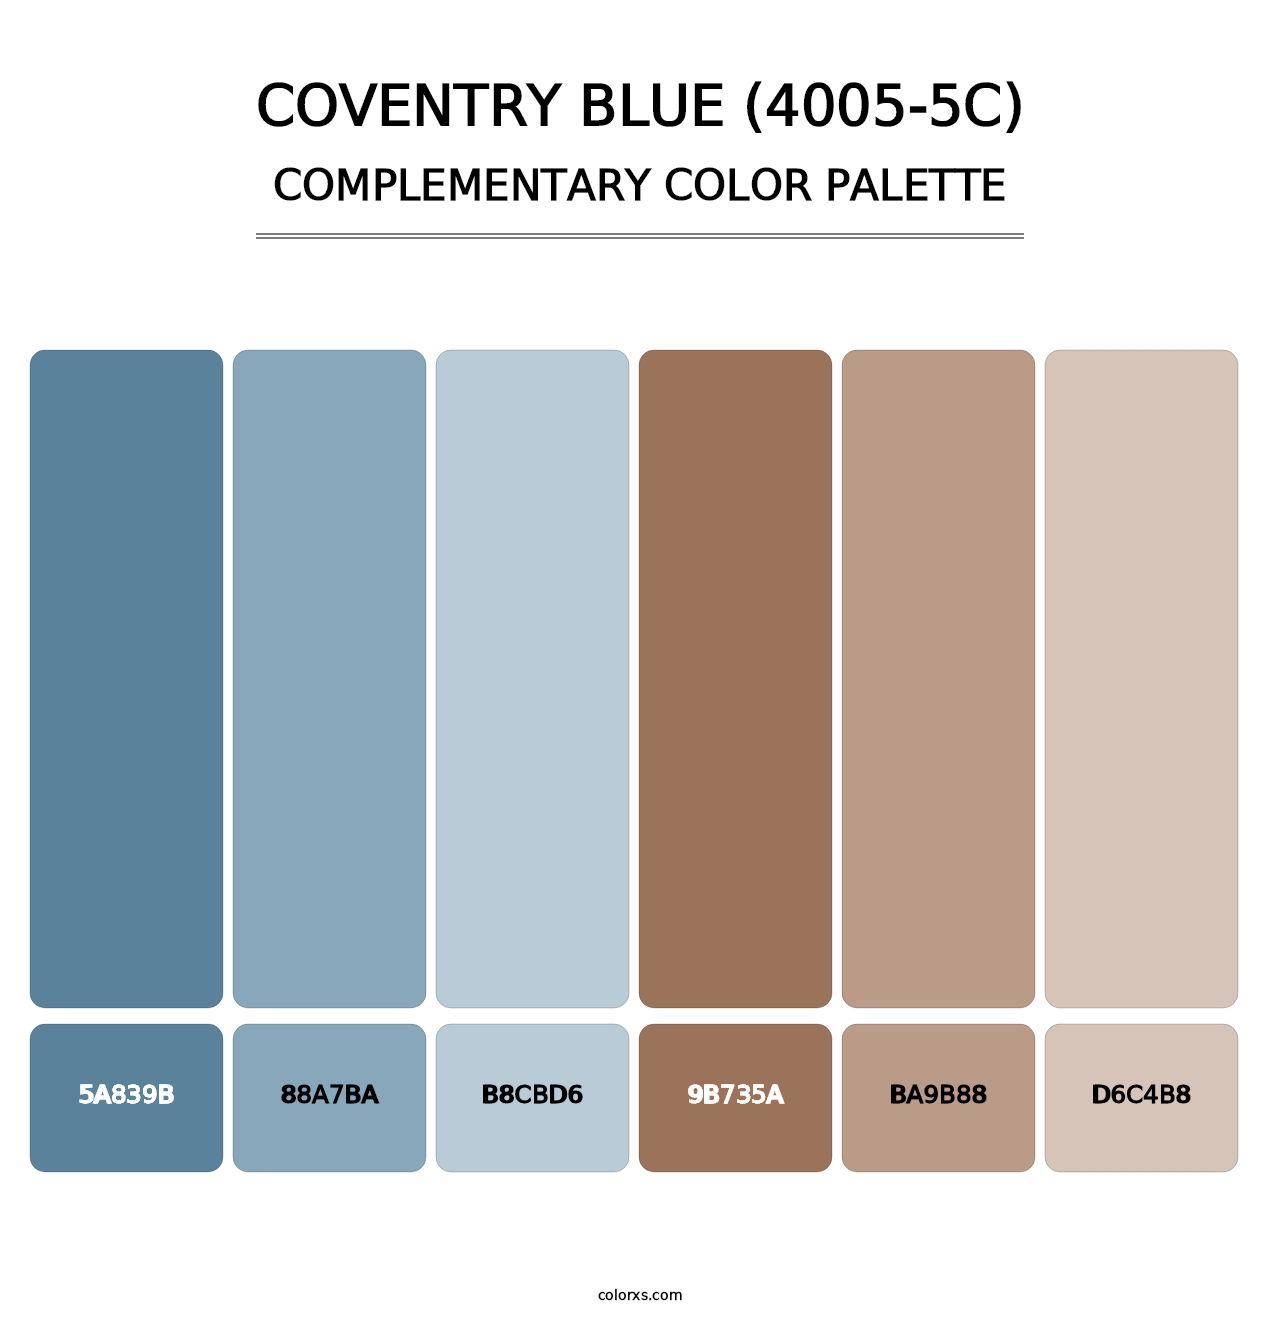 Coventry Blue (4005-5C) - Complementary Color Palette